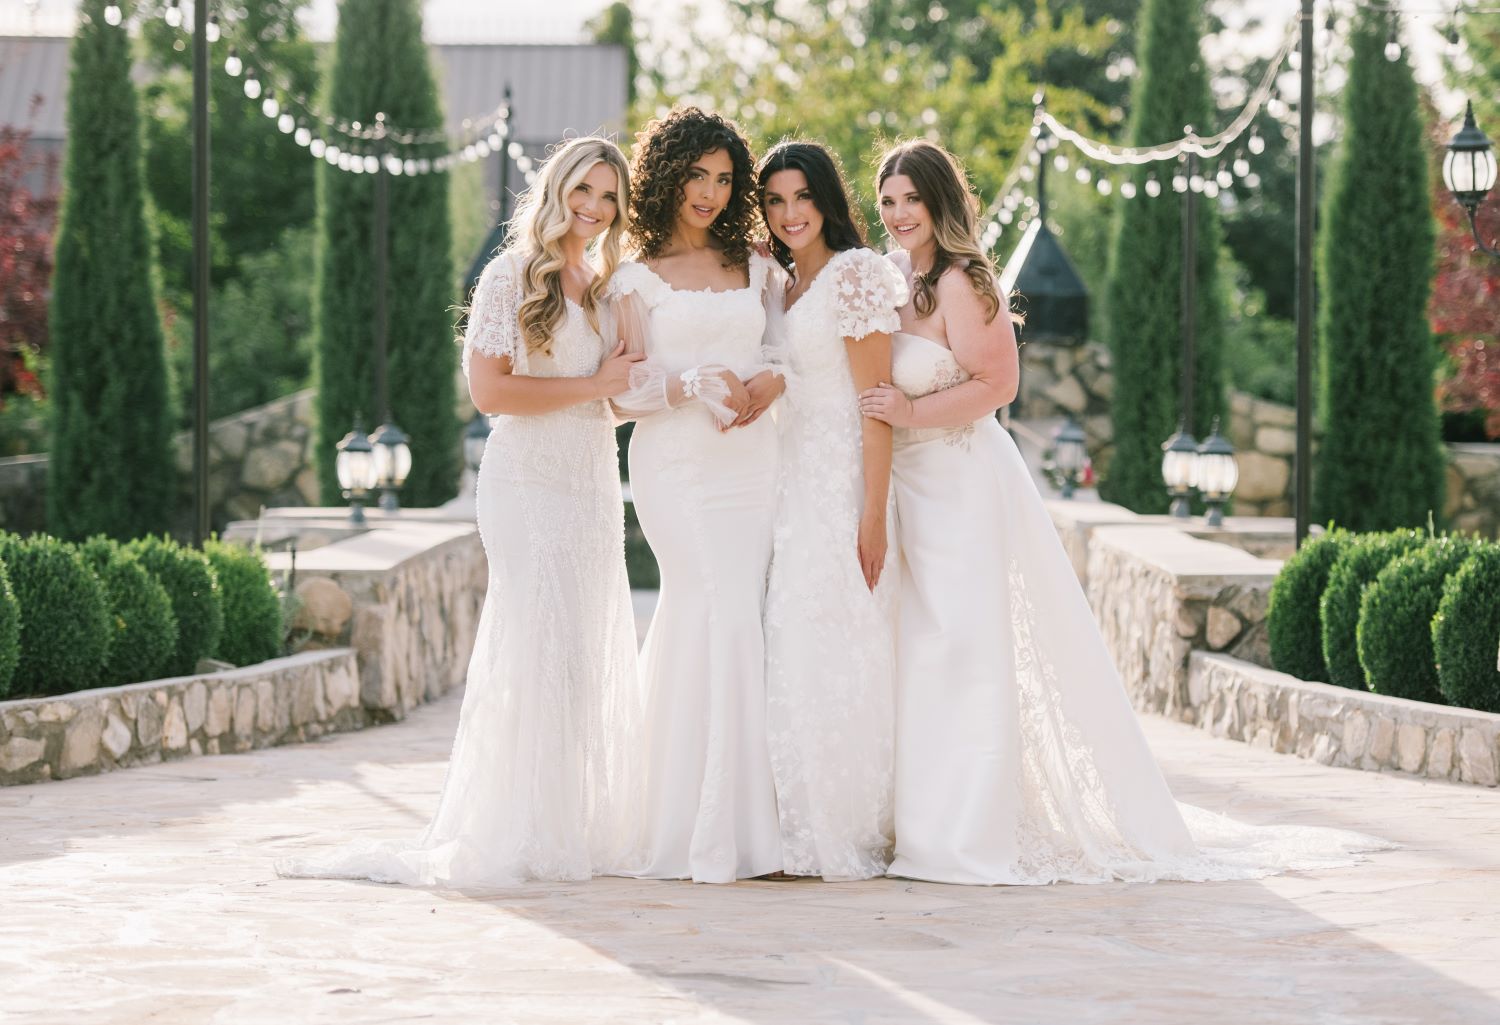 Four women wearing modest wedding dresses and strapless wedding dresses standing together on a stone path.